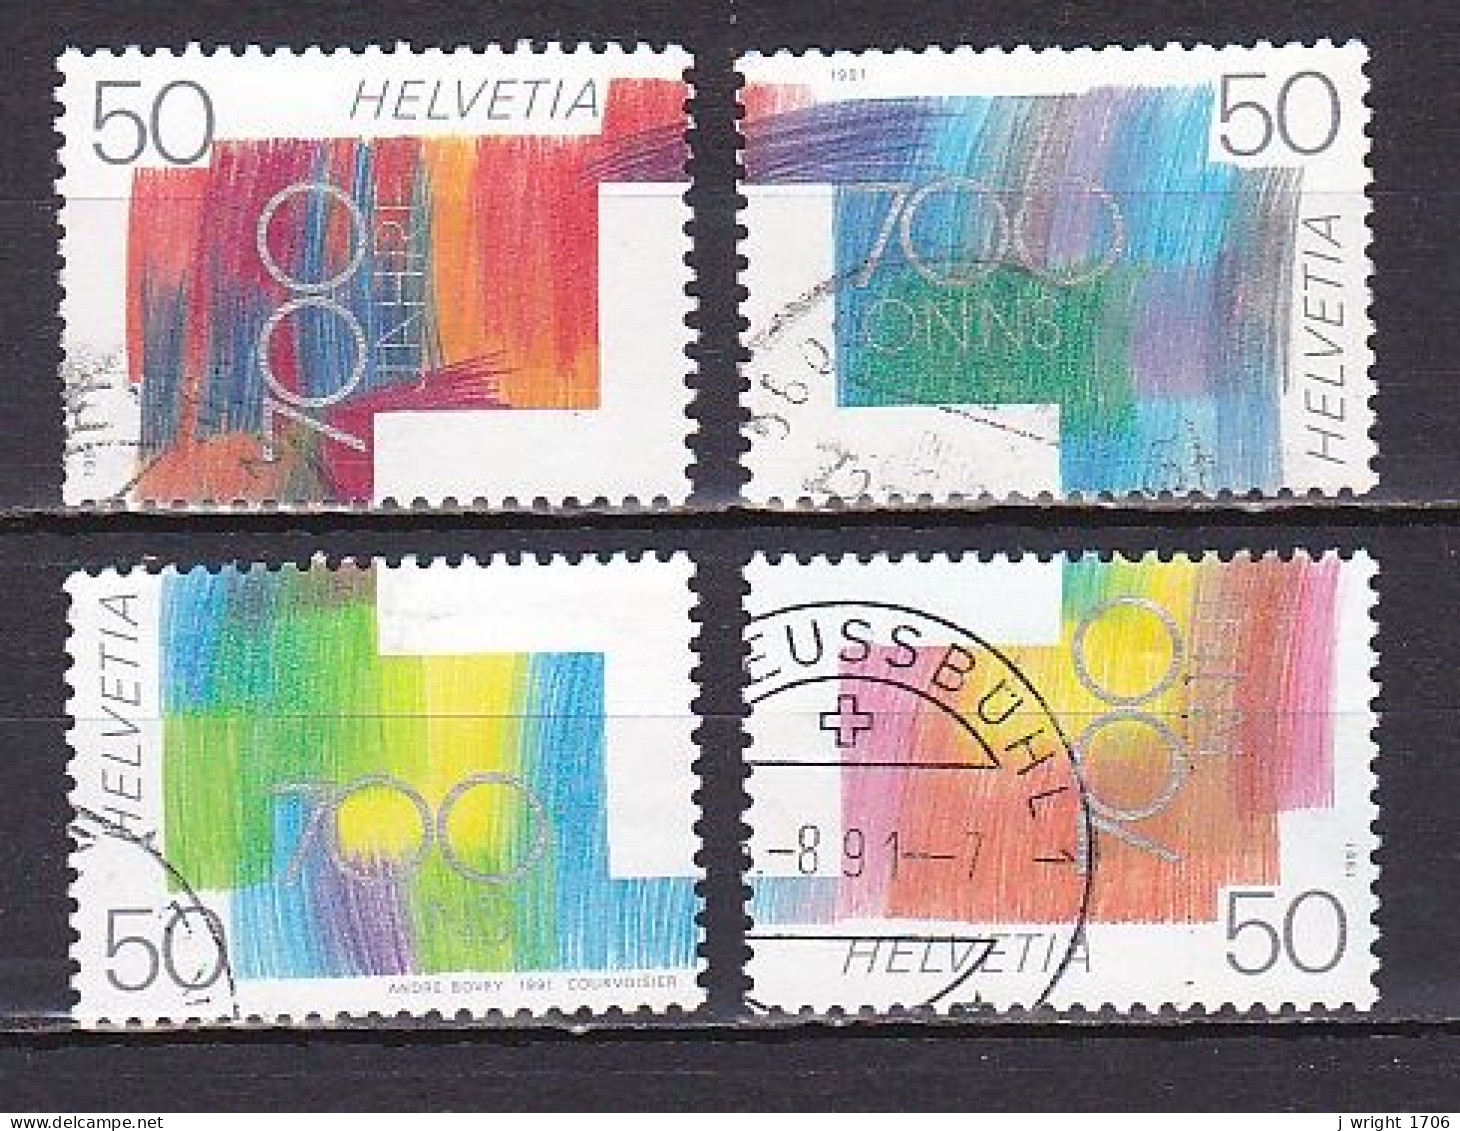 Switzerland, 1991, Swiss Conferderation 700th Anniv, Set, USED - Used Stamps